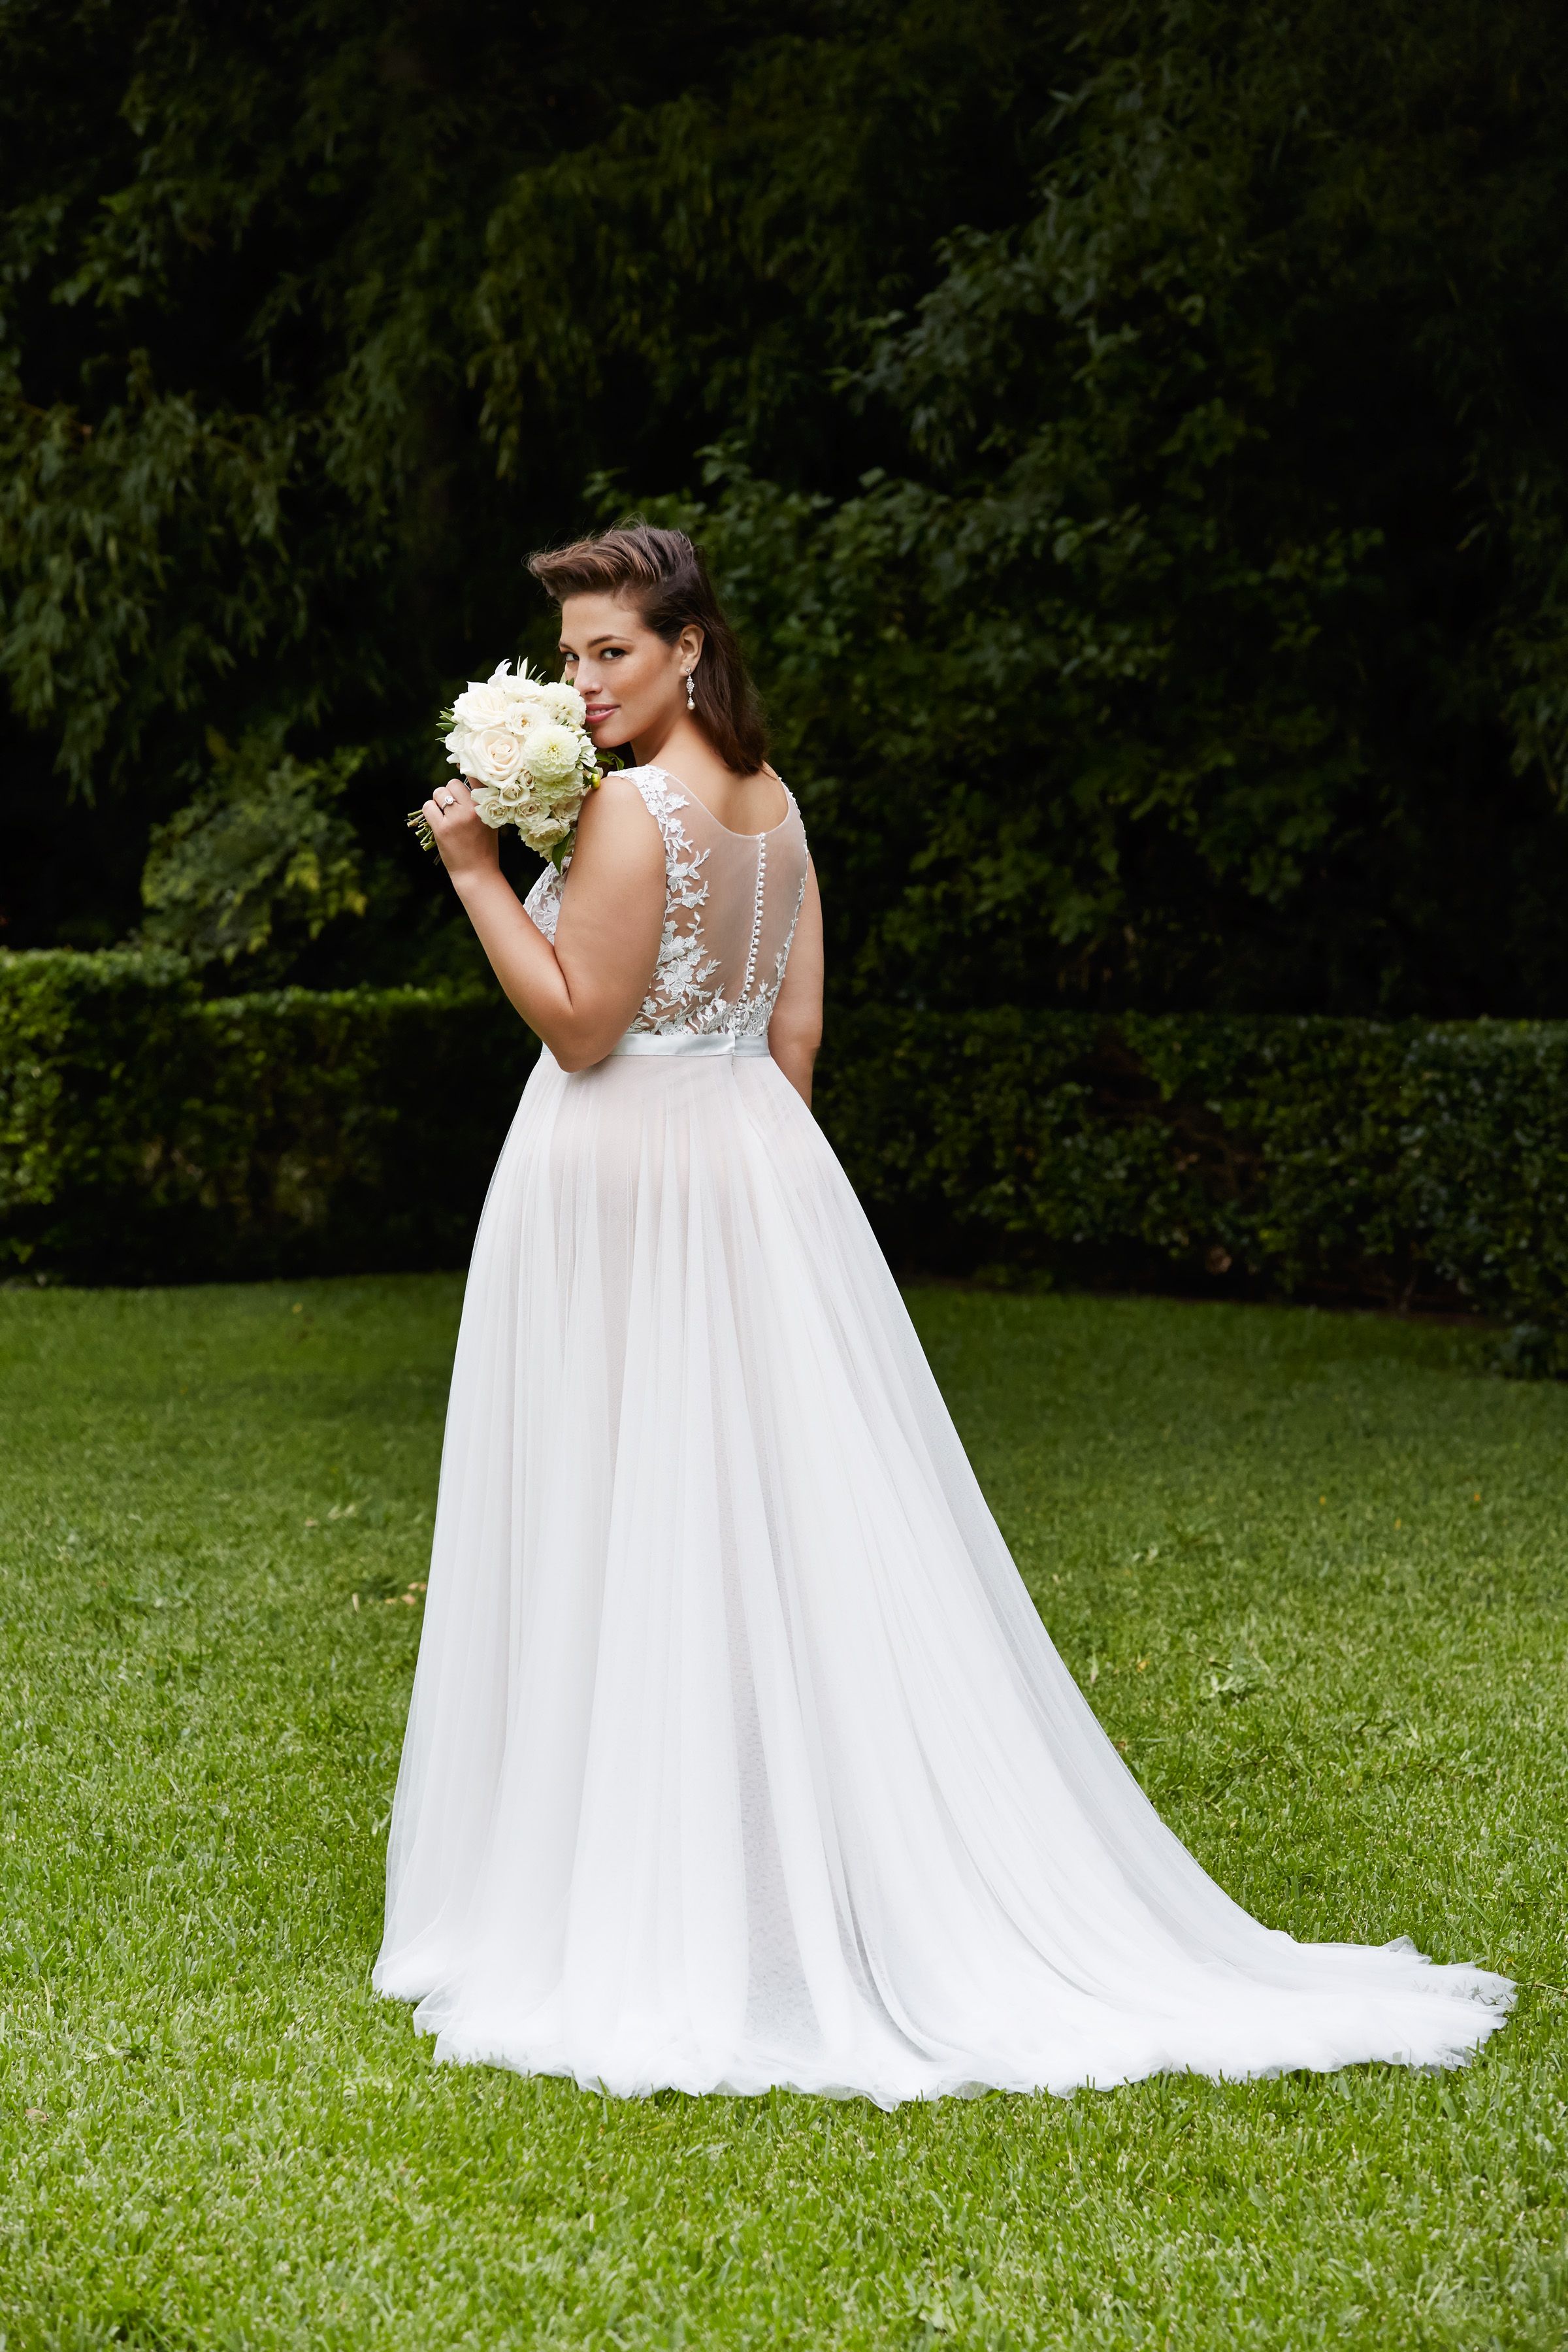 Plus Size Wedding Dresses for the Modern Bride  5 Wedding Dress Designers  for the Curvy Bride